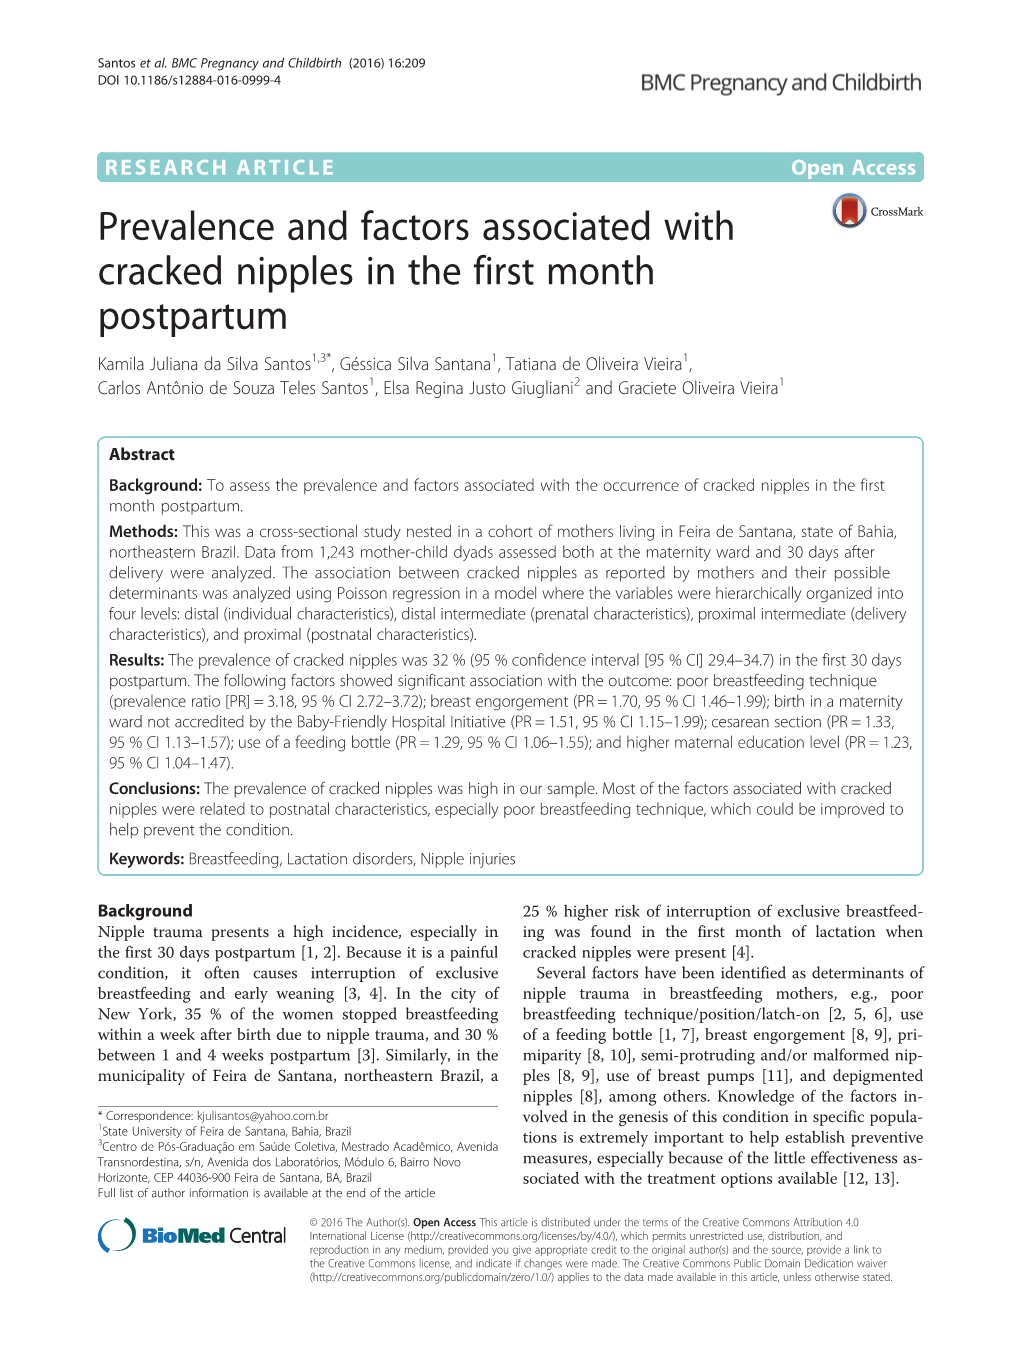 Prevalence and Factors Associated with Cracked Nipples in the First Month Postpartum